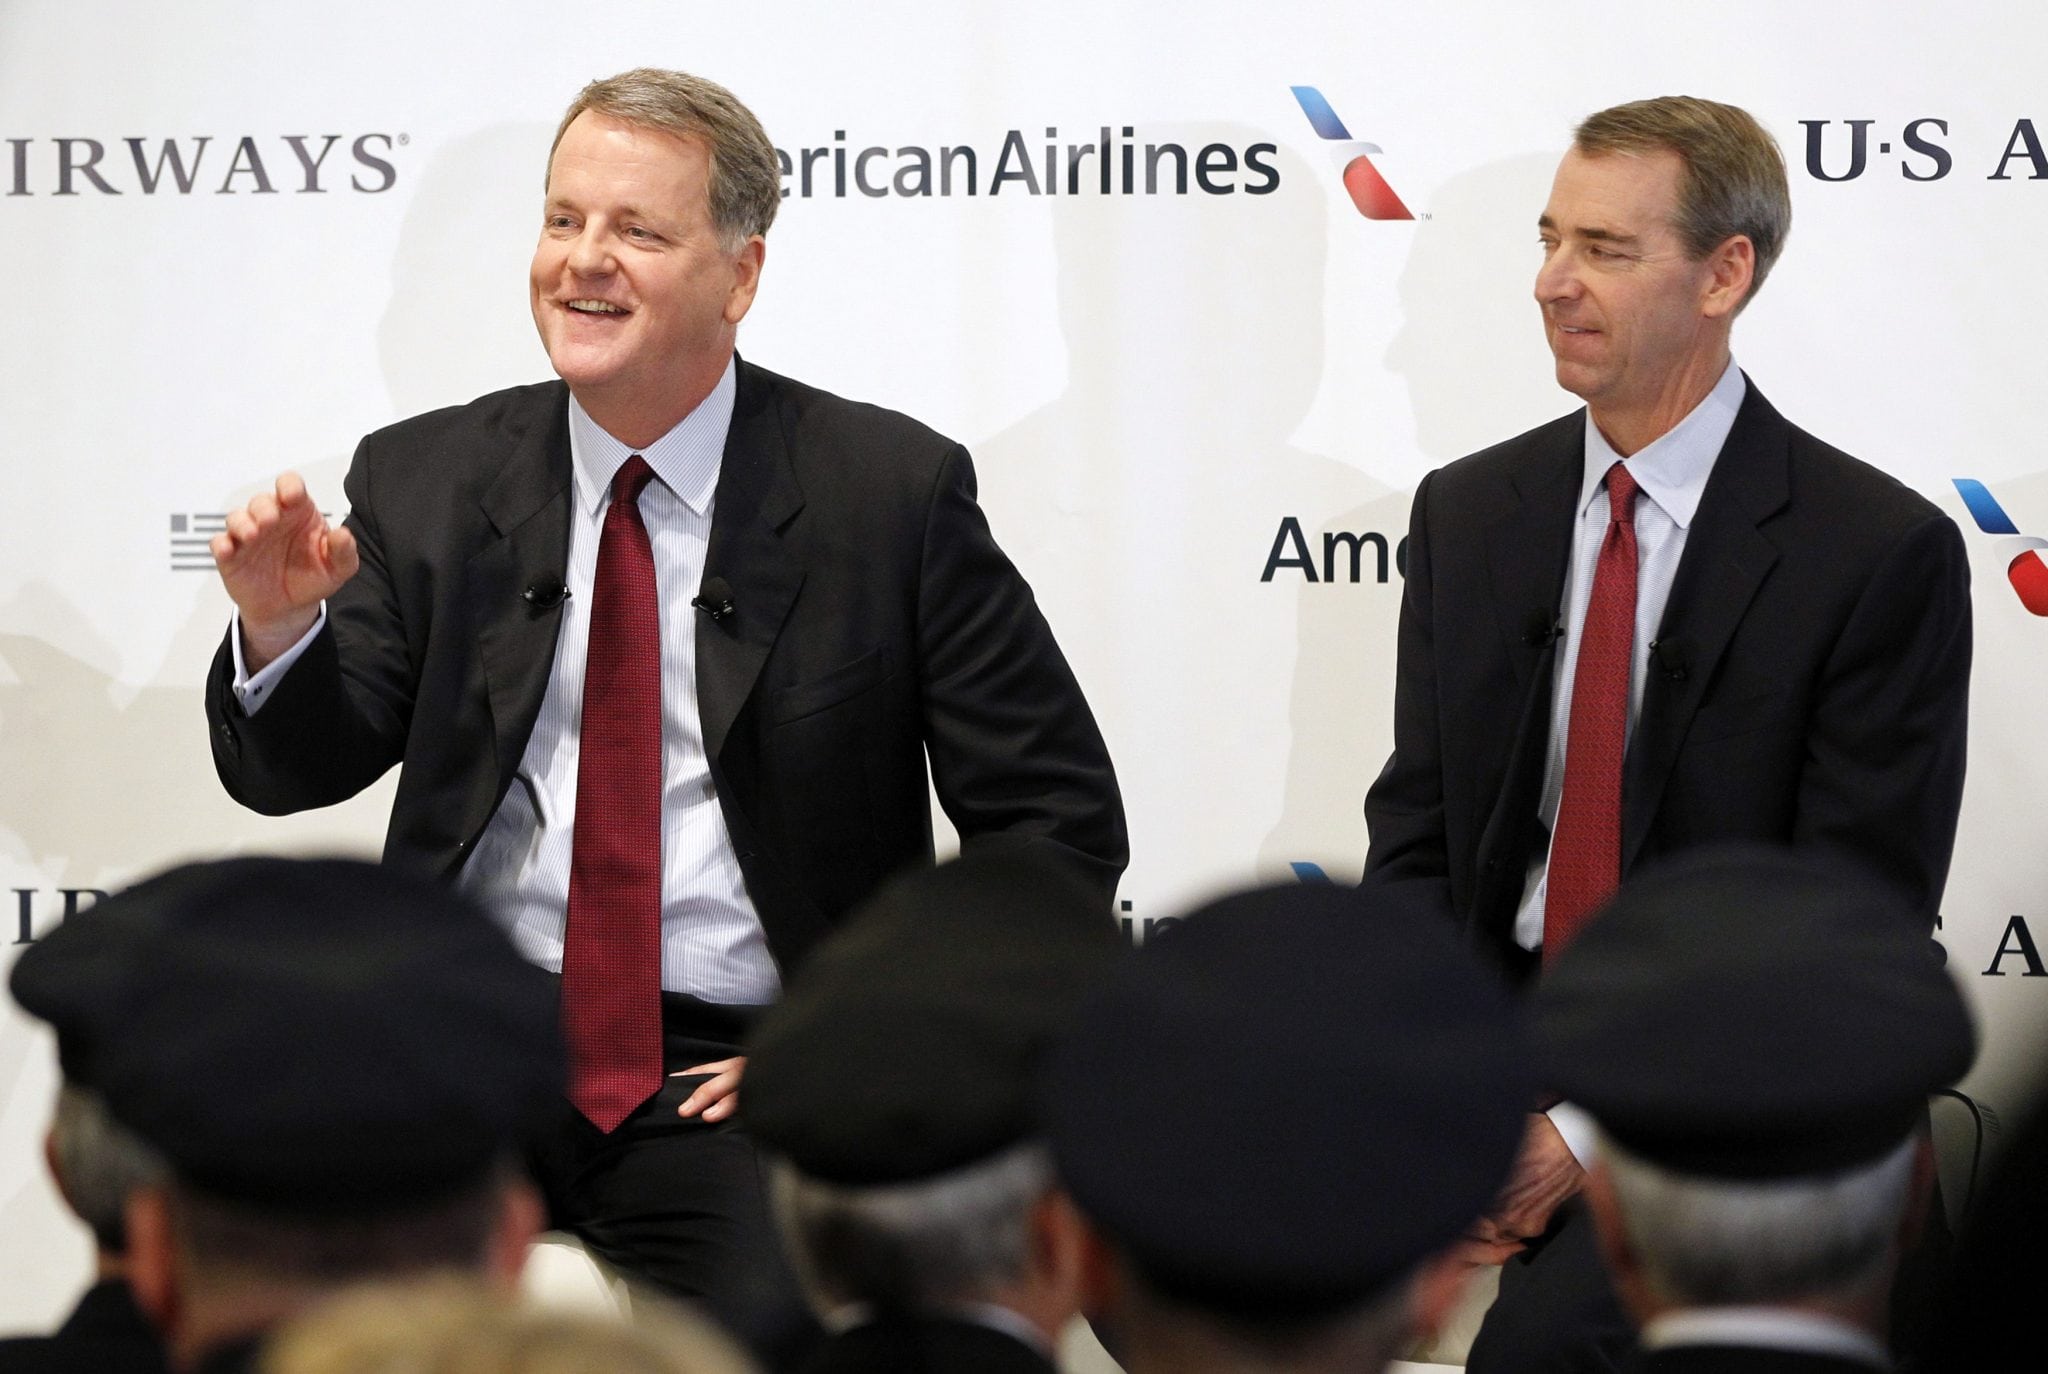 US Airways CEO Parker and American Airlines Chairman, President and CEO Horton announce the planned merger of American Airlines and US Airways during a news conference at Dallas-Ft Worth International Airport. 